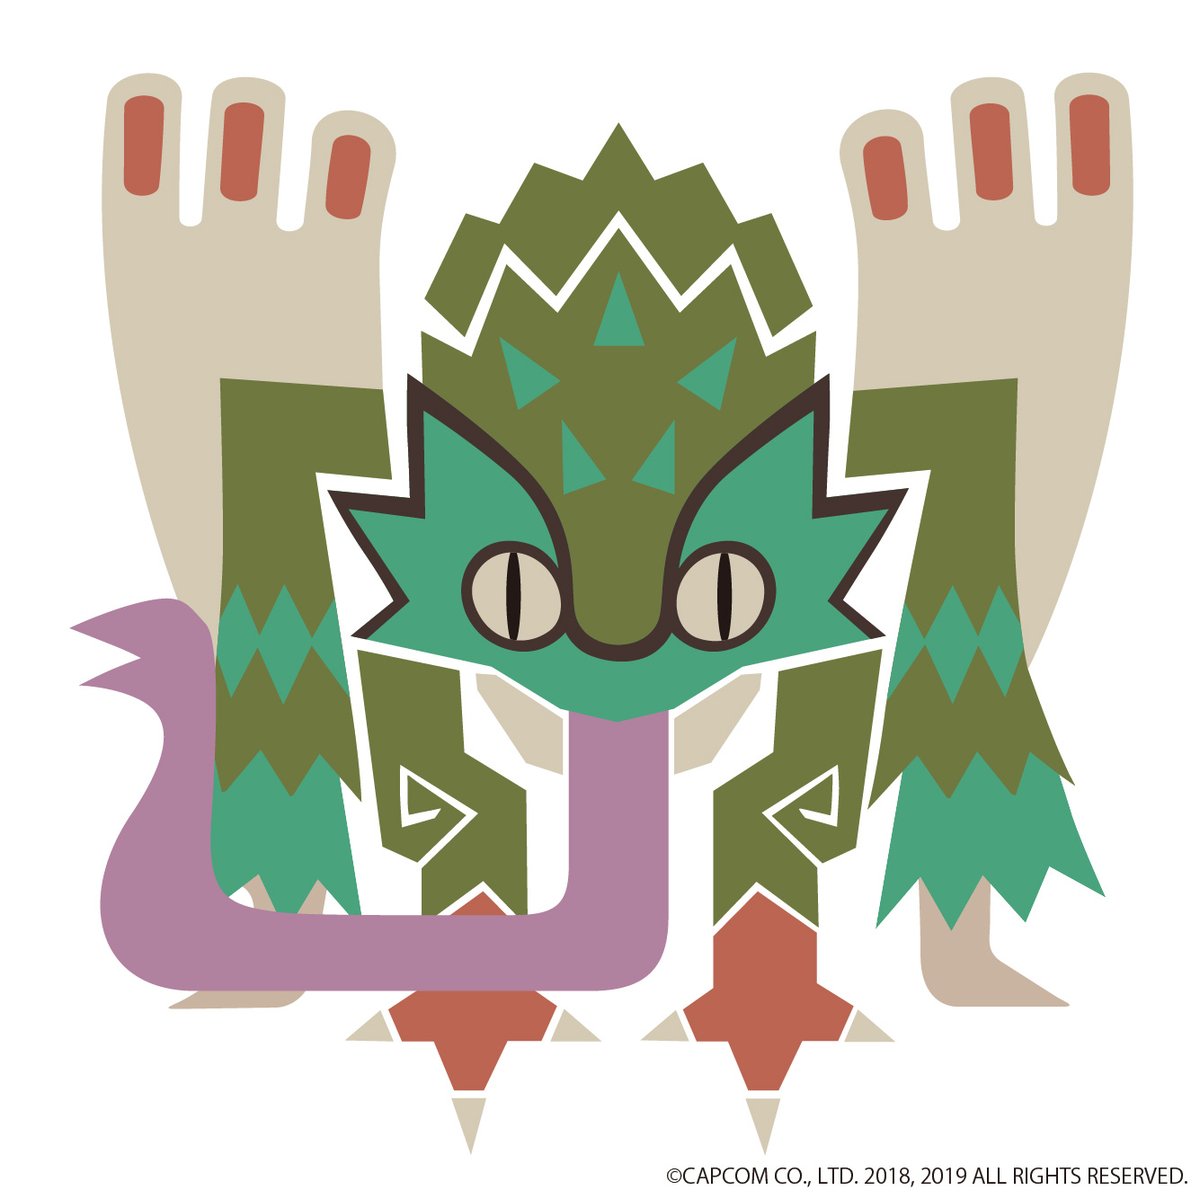 Next up, let's give the toxic Pukei-Pukei some colorful feathers! ? #StayHome 